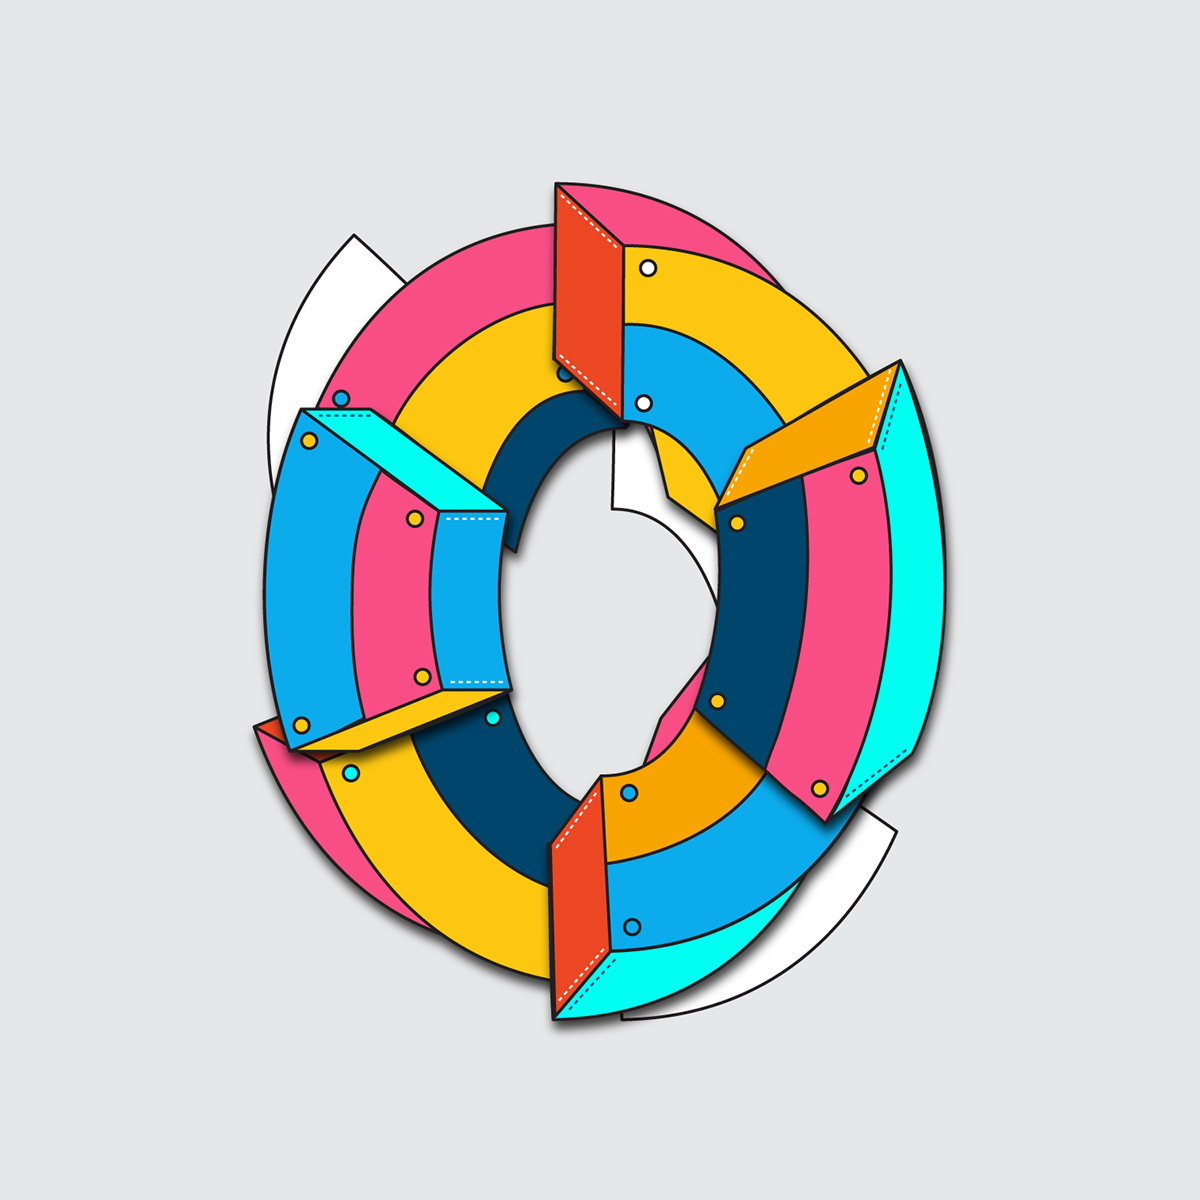 36daysoftype 36days type 3D Illustrator vector collage c4d SketchUP 36daysoftype03